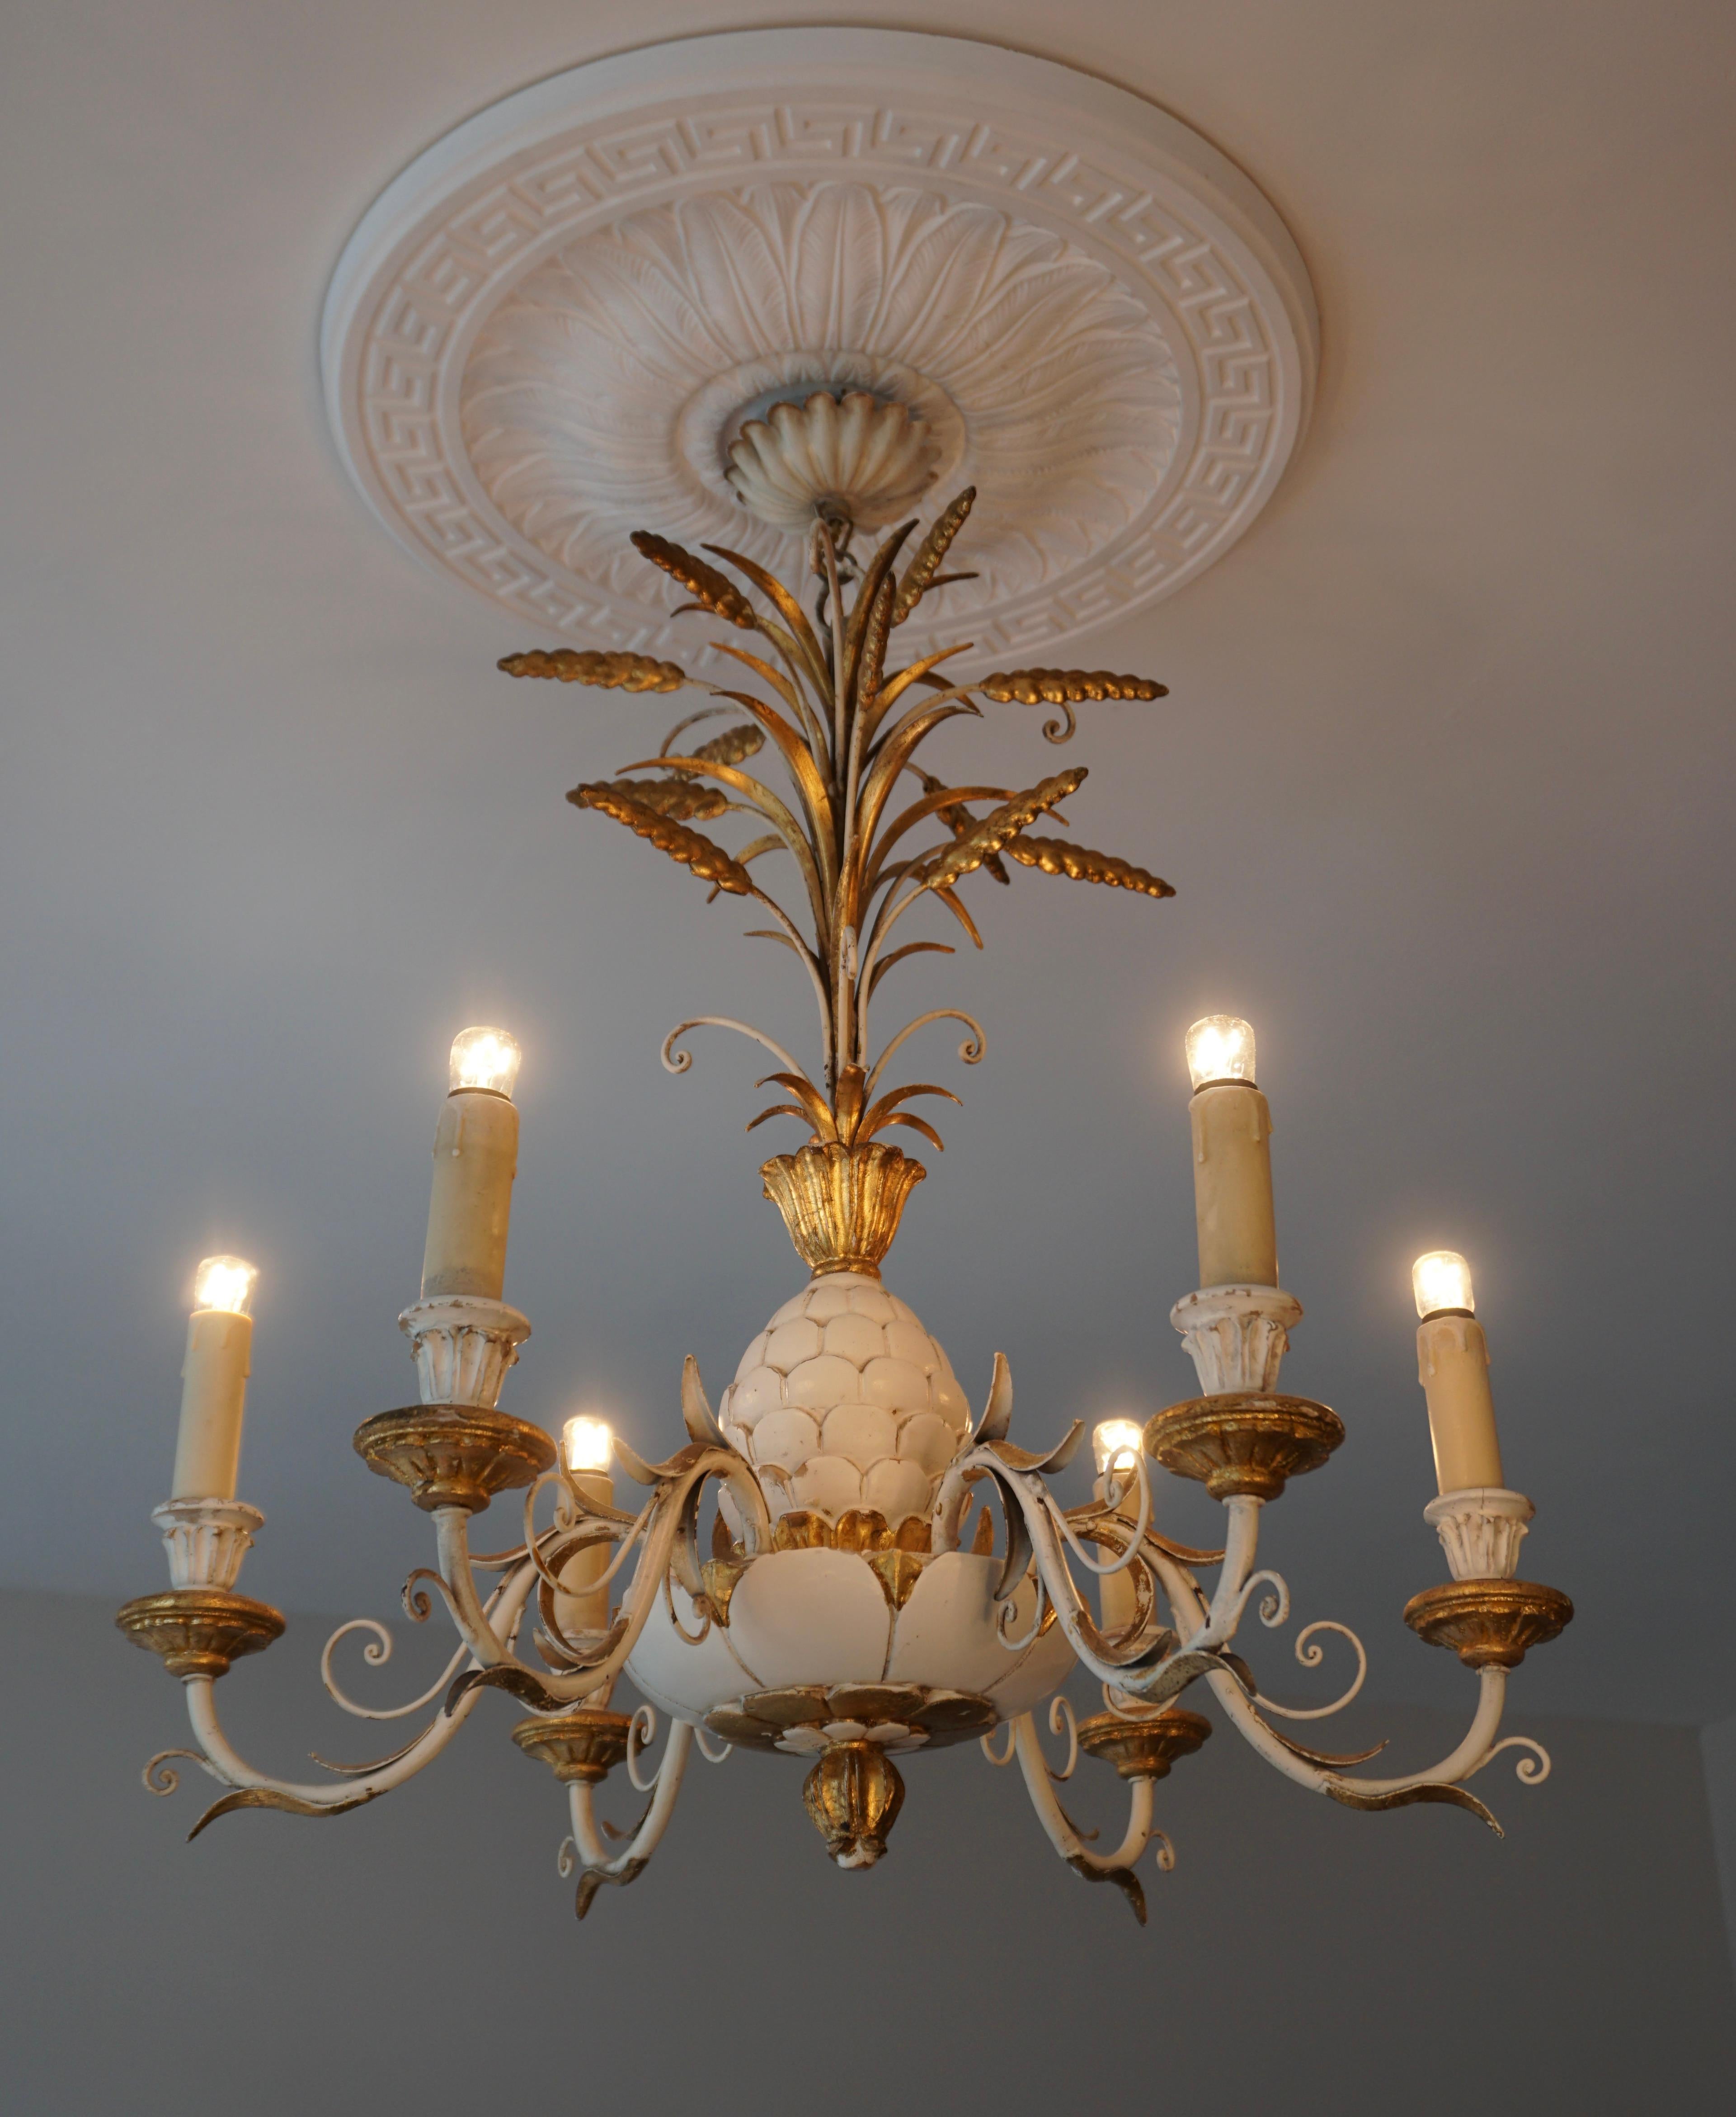 20th Century Italian Tole and Brass Pineapple and Palm Leaf Chandelier For Sale